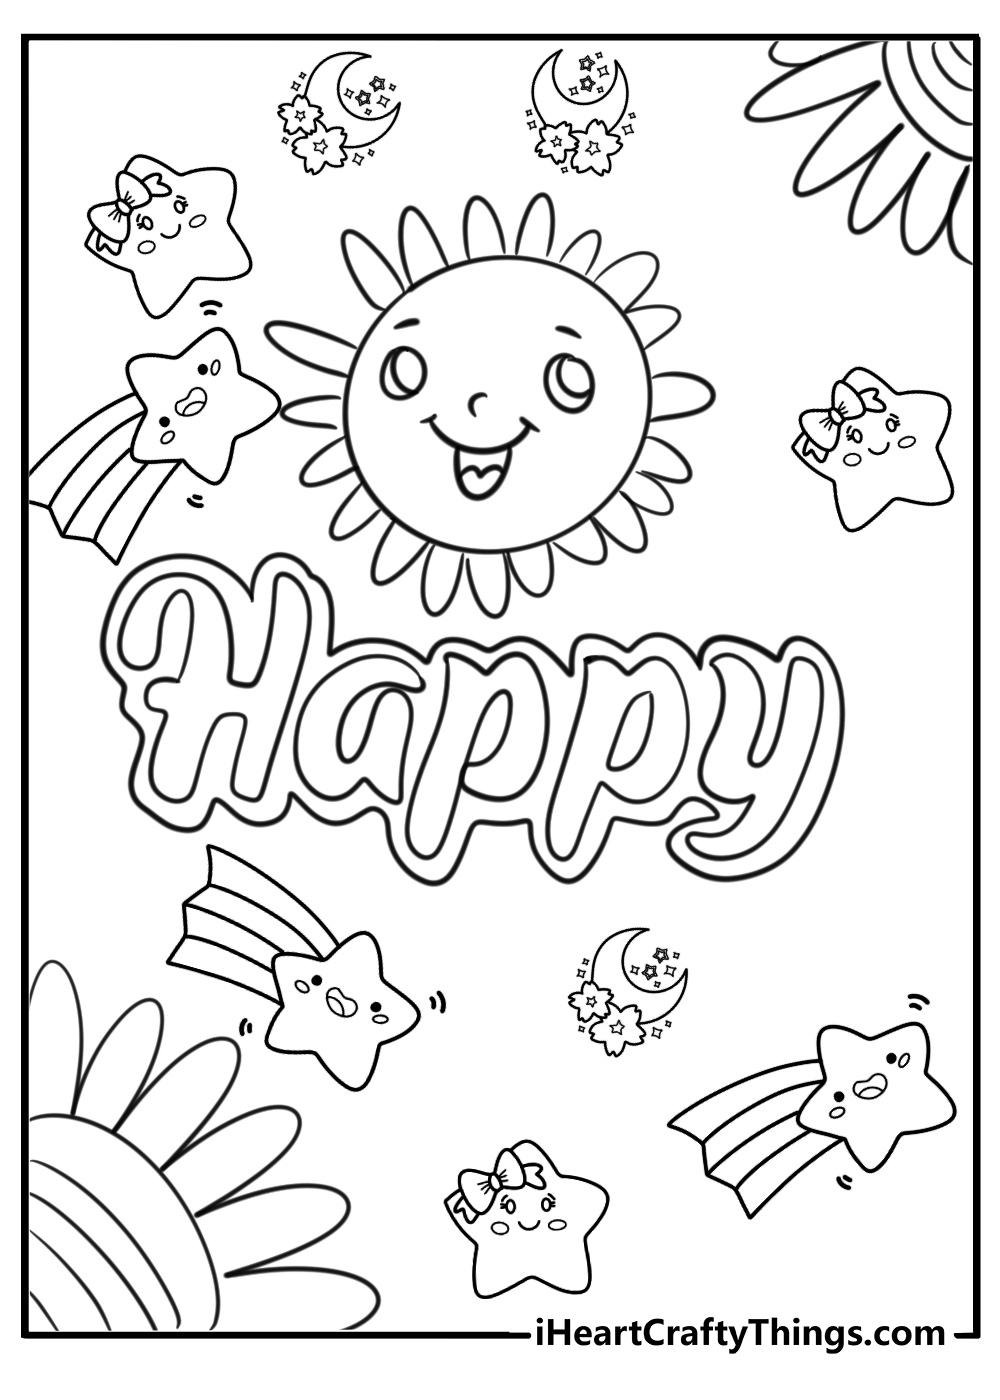 The word happy in a printable